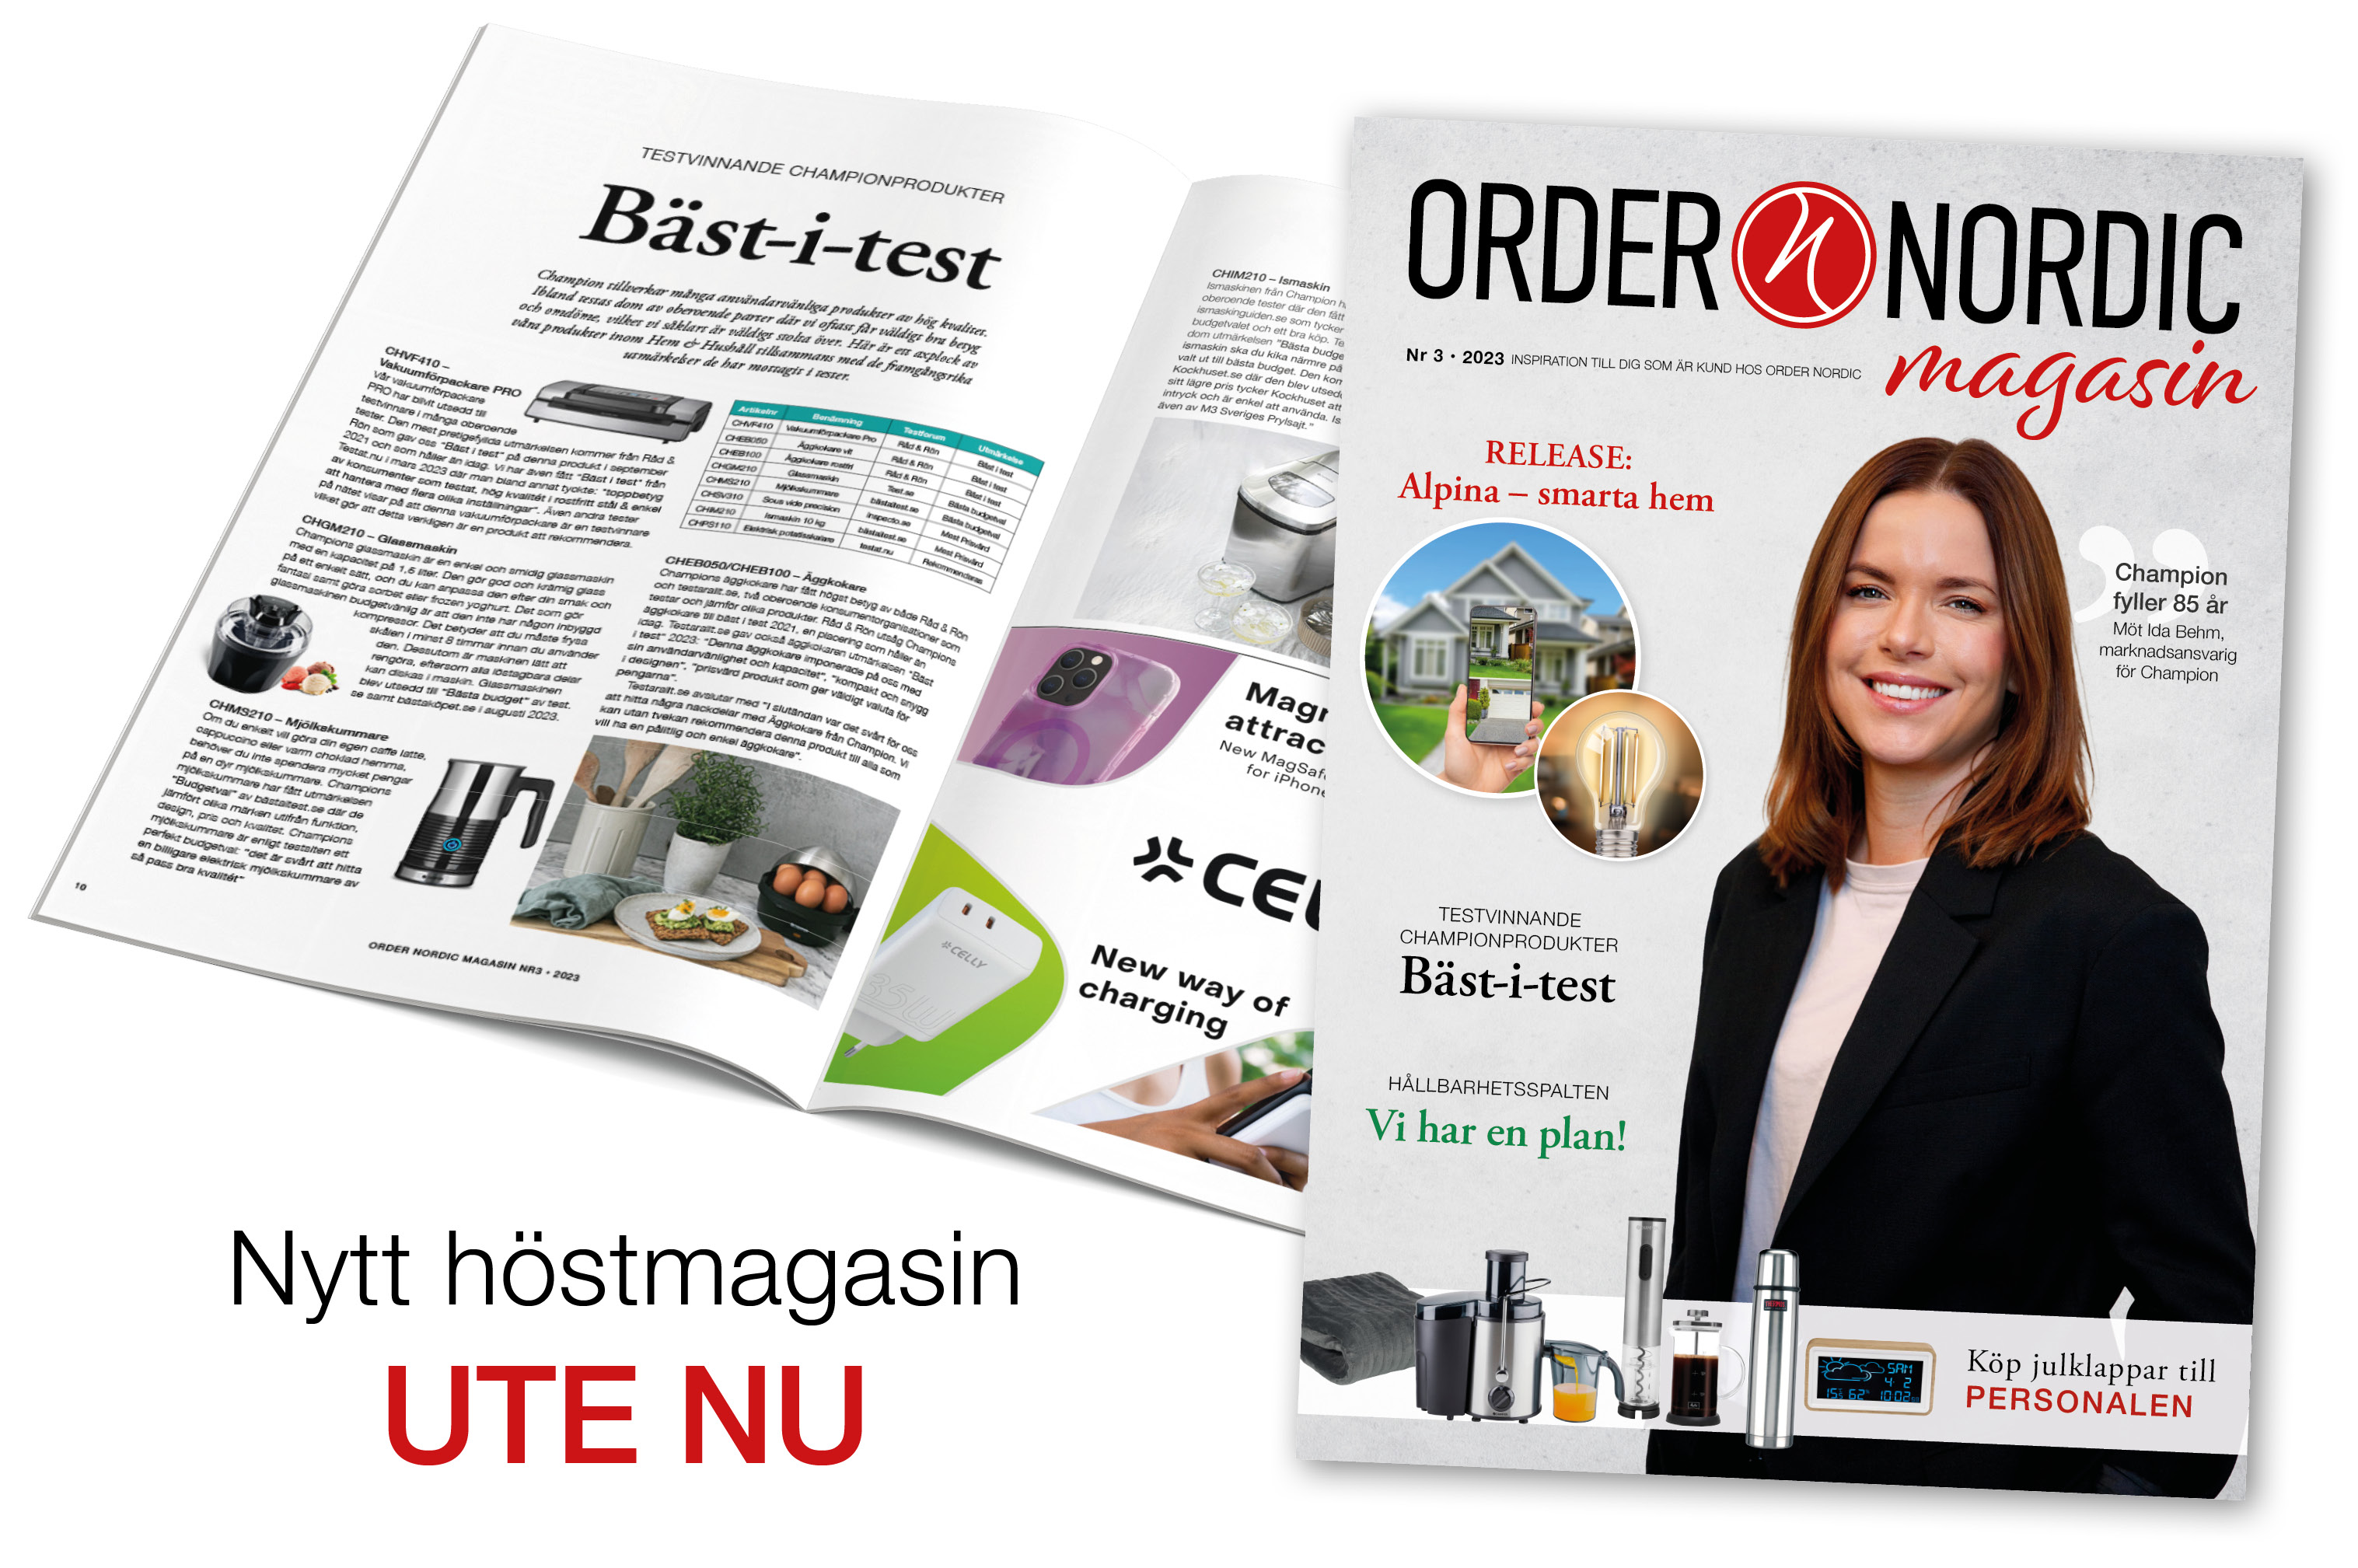 Magasin nr 3 2023